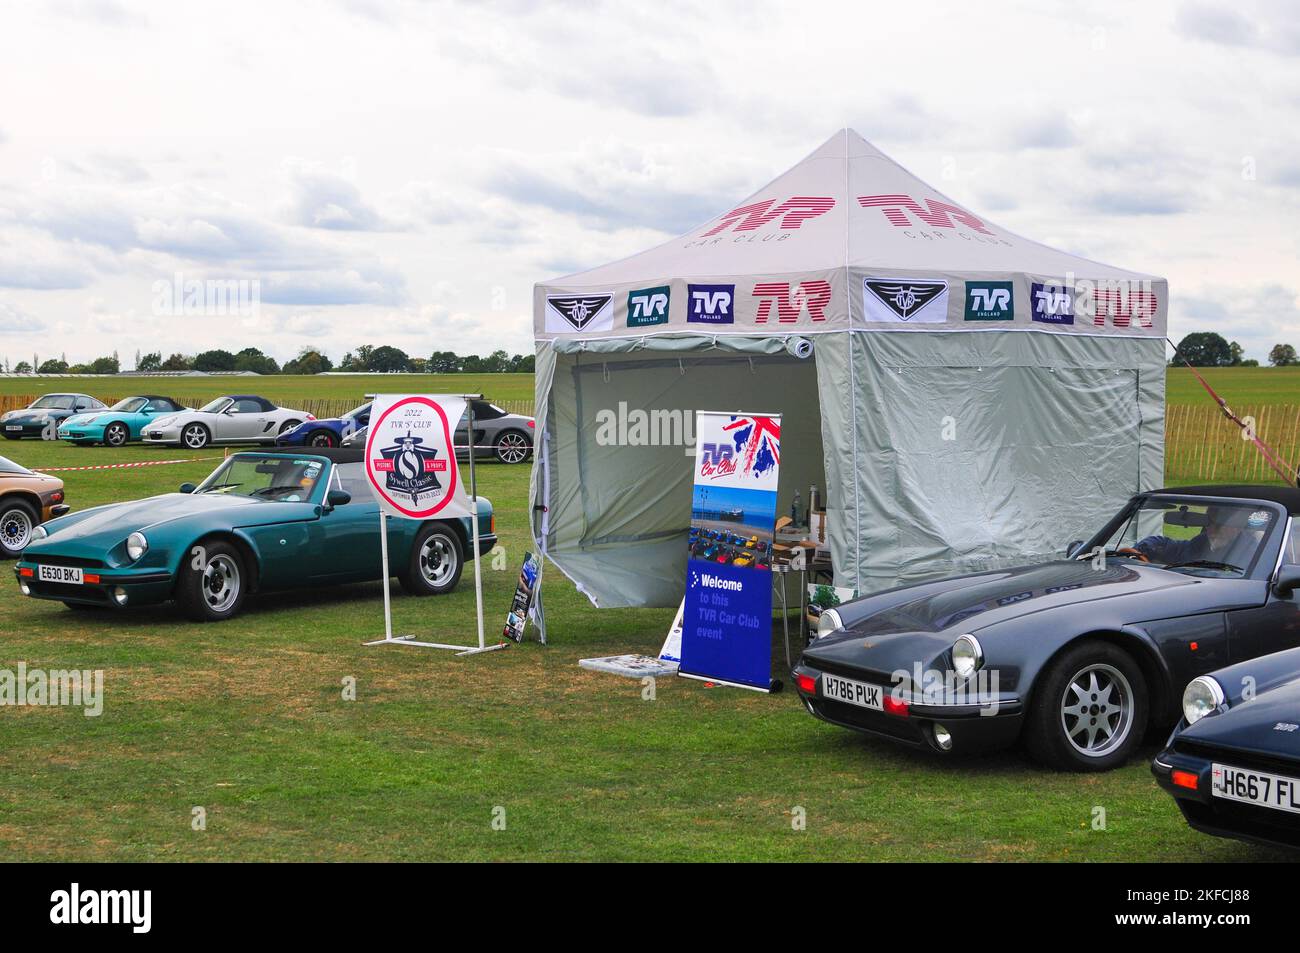 TVR Classic car show Angleterre Royaume-Uni Banque D'Images